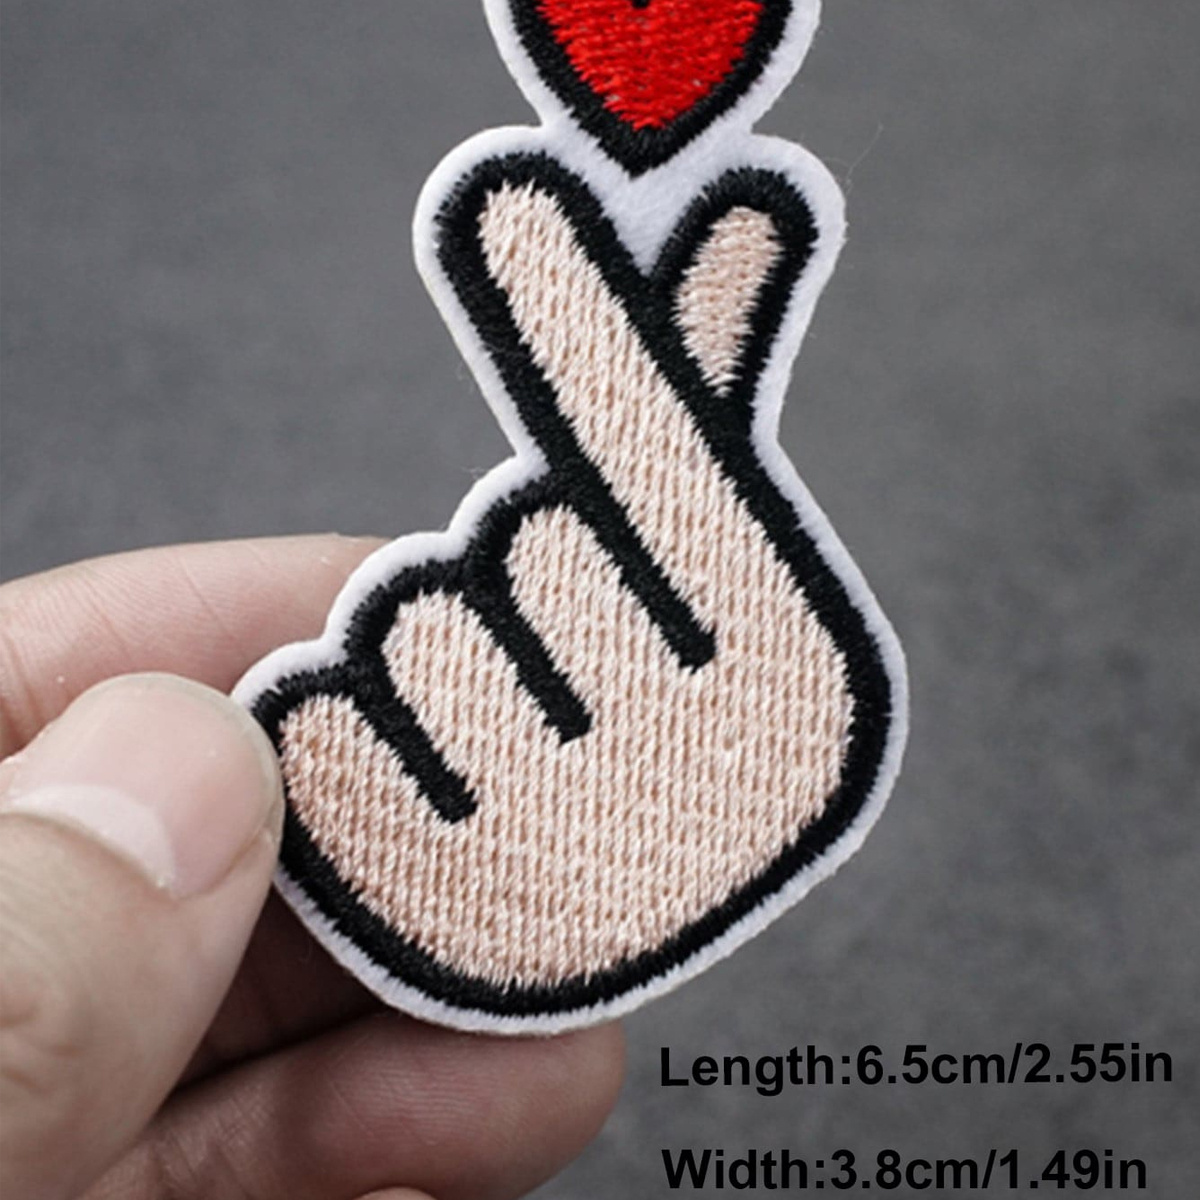 Hand Gesture Finger Cute Iron On Patches Sewing Embroidered Applique for  Jacket Clothes Stickers Badge DIY Apparel Accessories - AliExpress